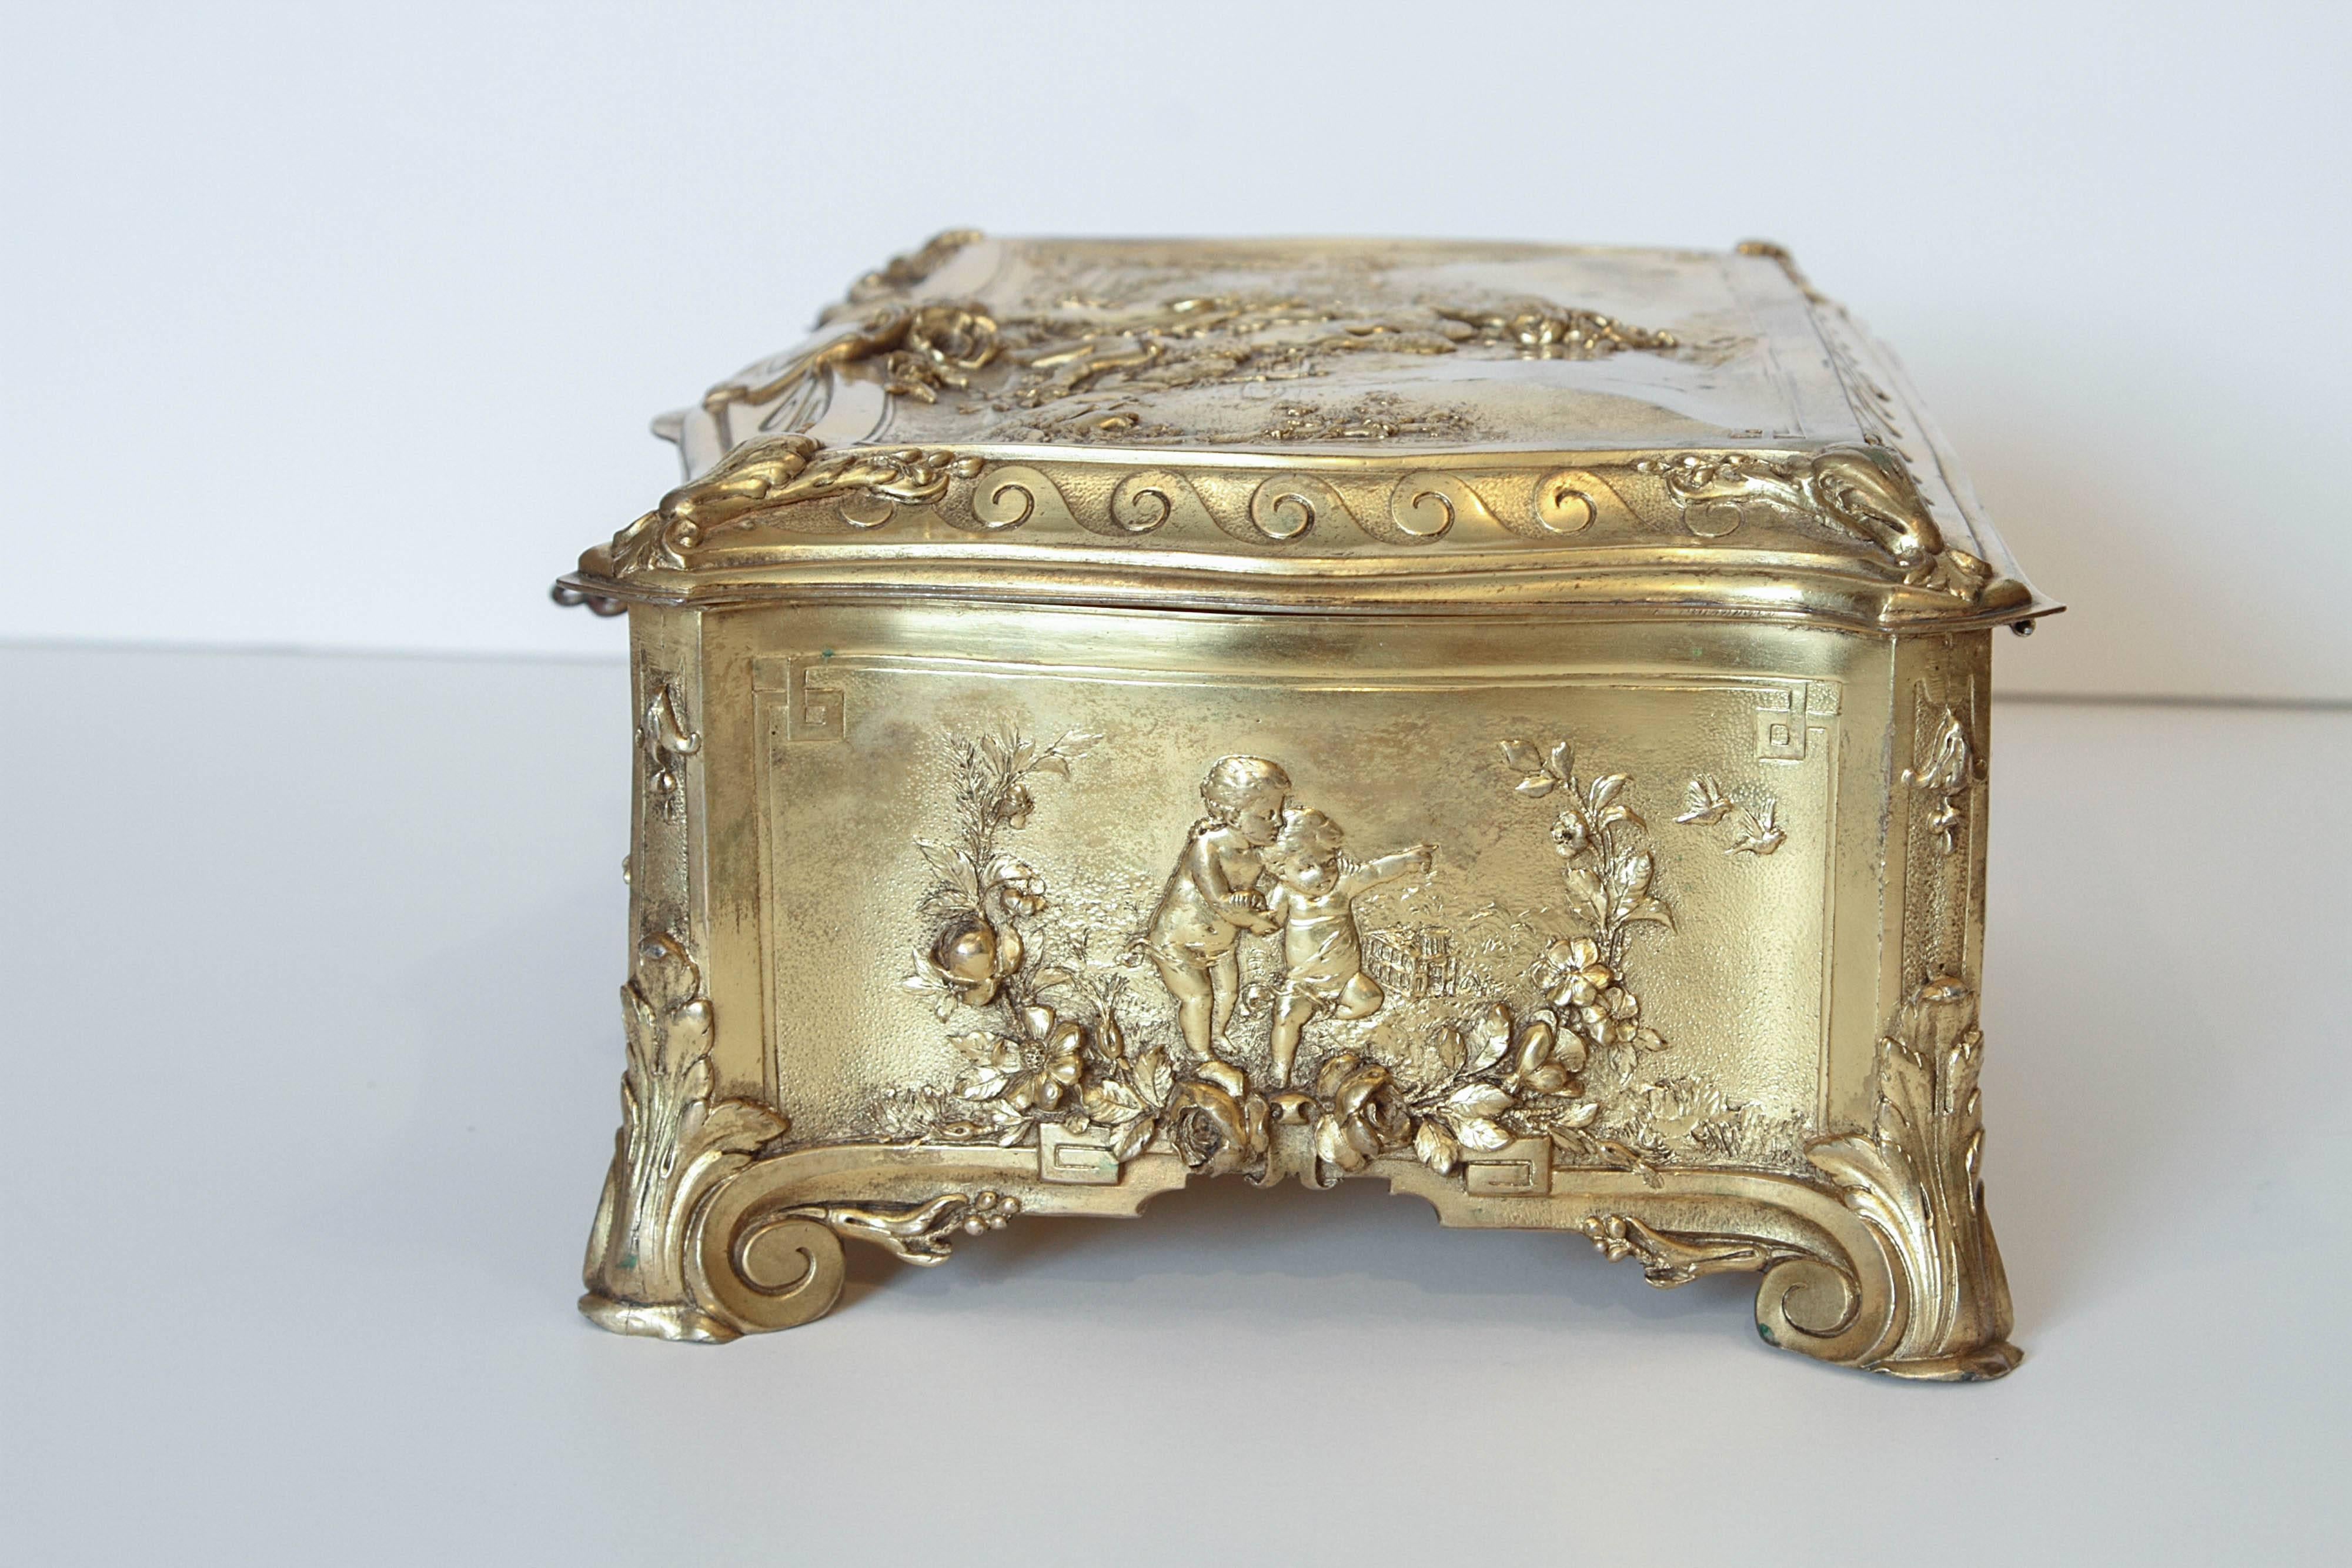 19th Century French Large and Finely Gilt Bronze Casket In Excellent Condition For Sale In Dallas, TX